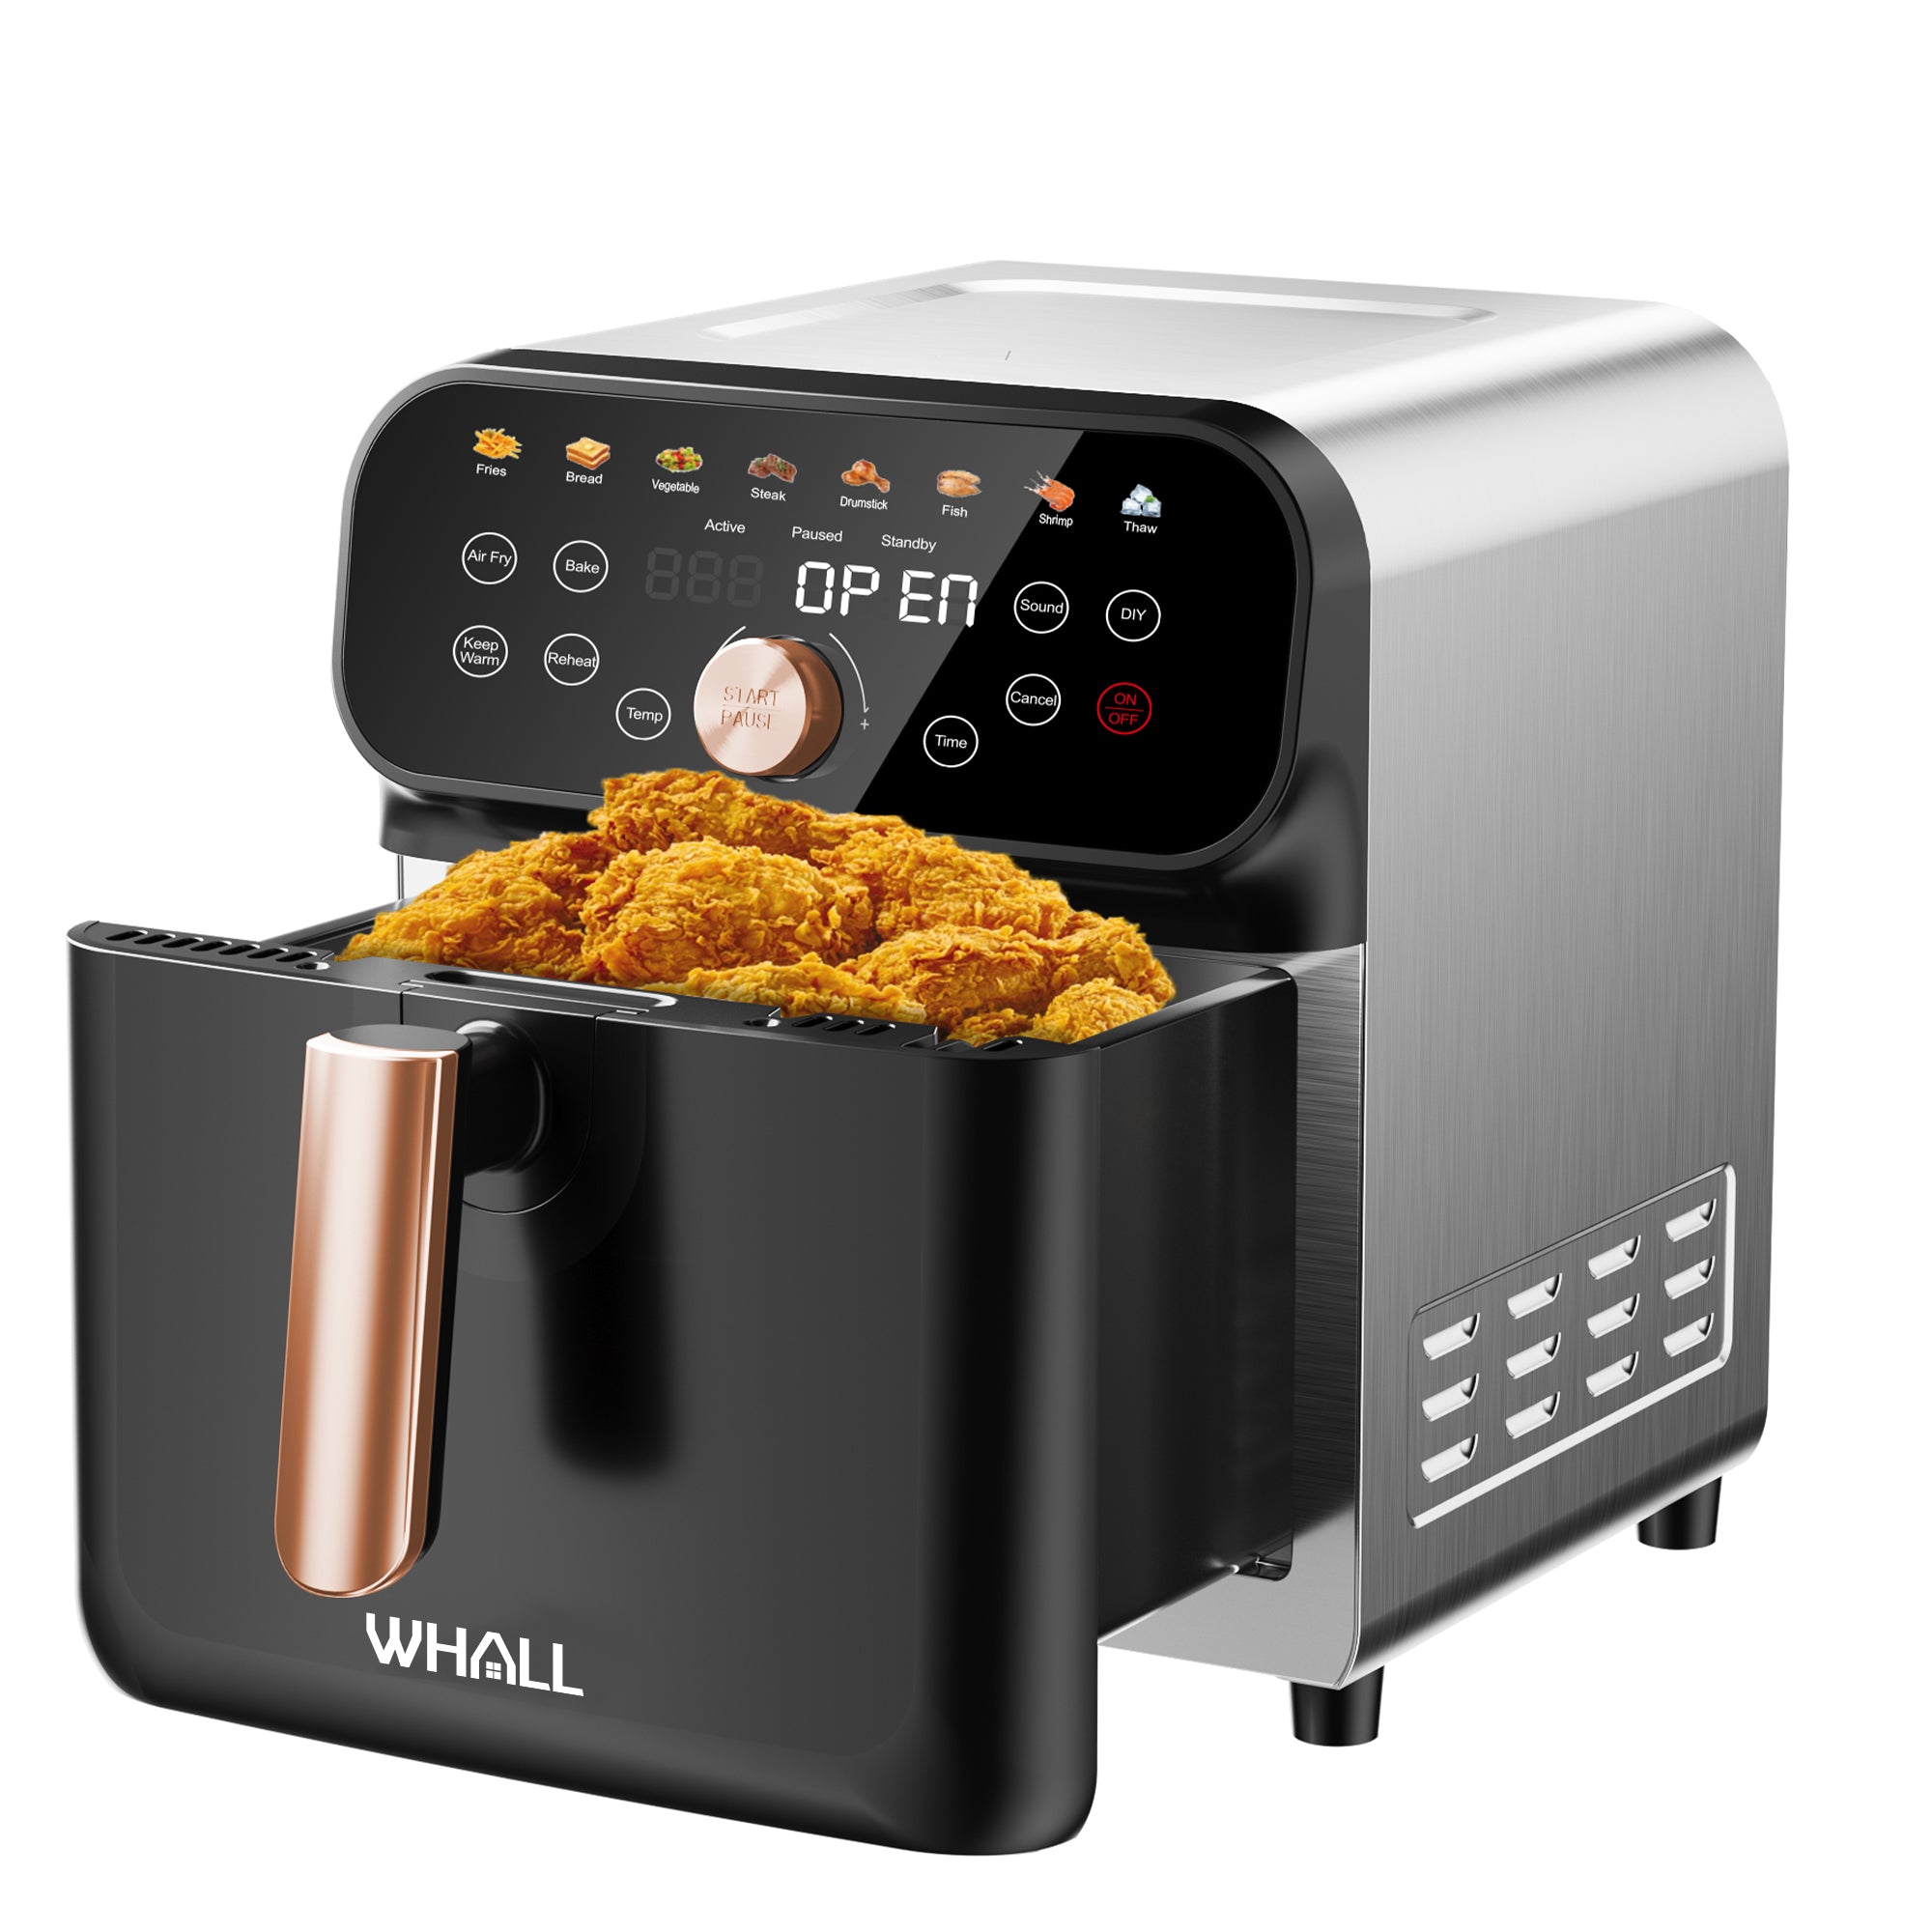 WHALL® 6.2QT Air Fryer Oven, 12-in-1 Cooking Functions, Stainless Steel